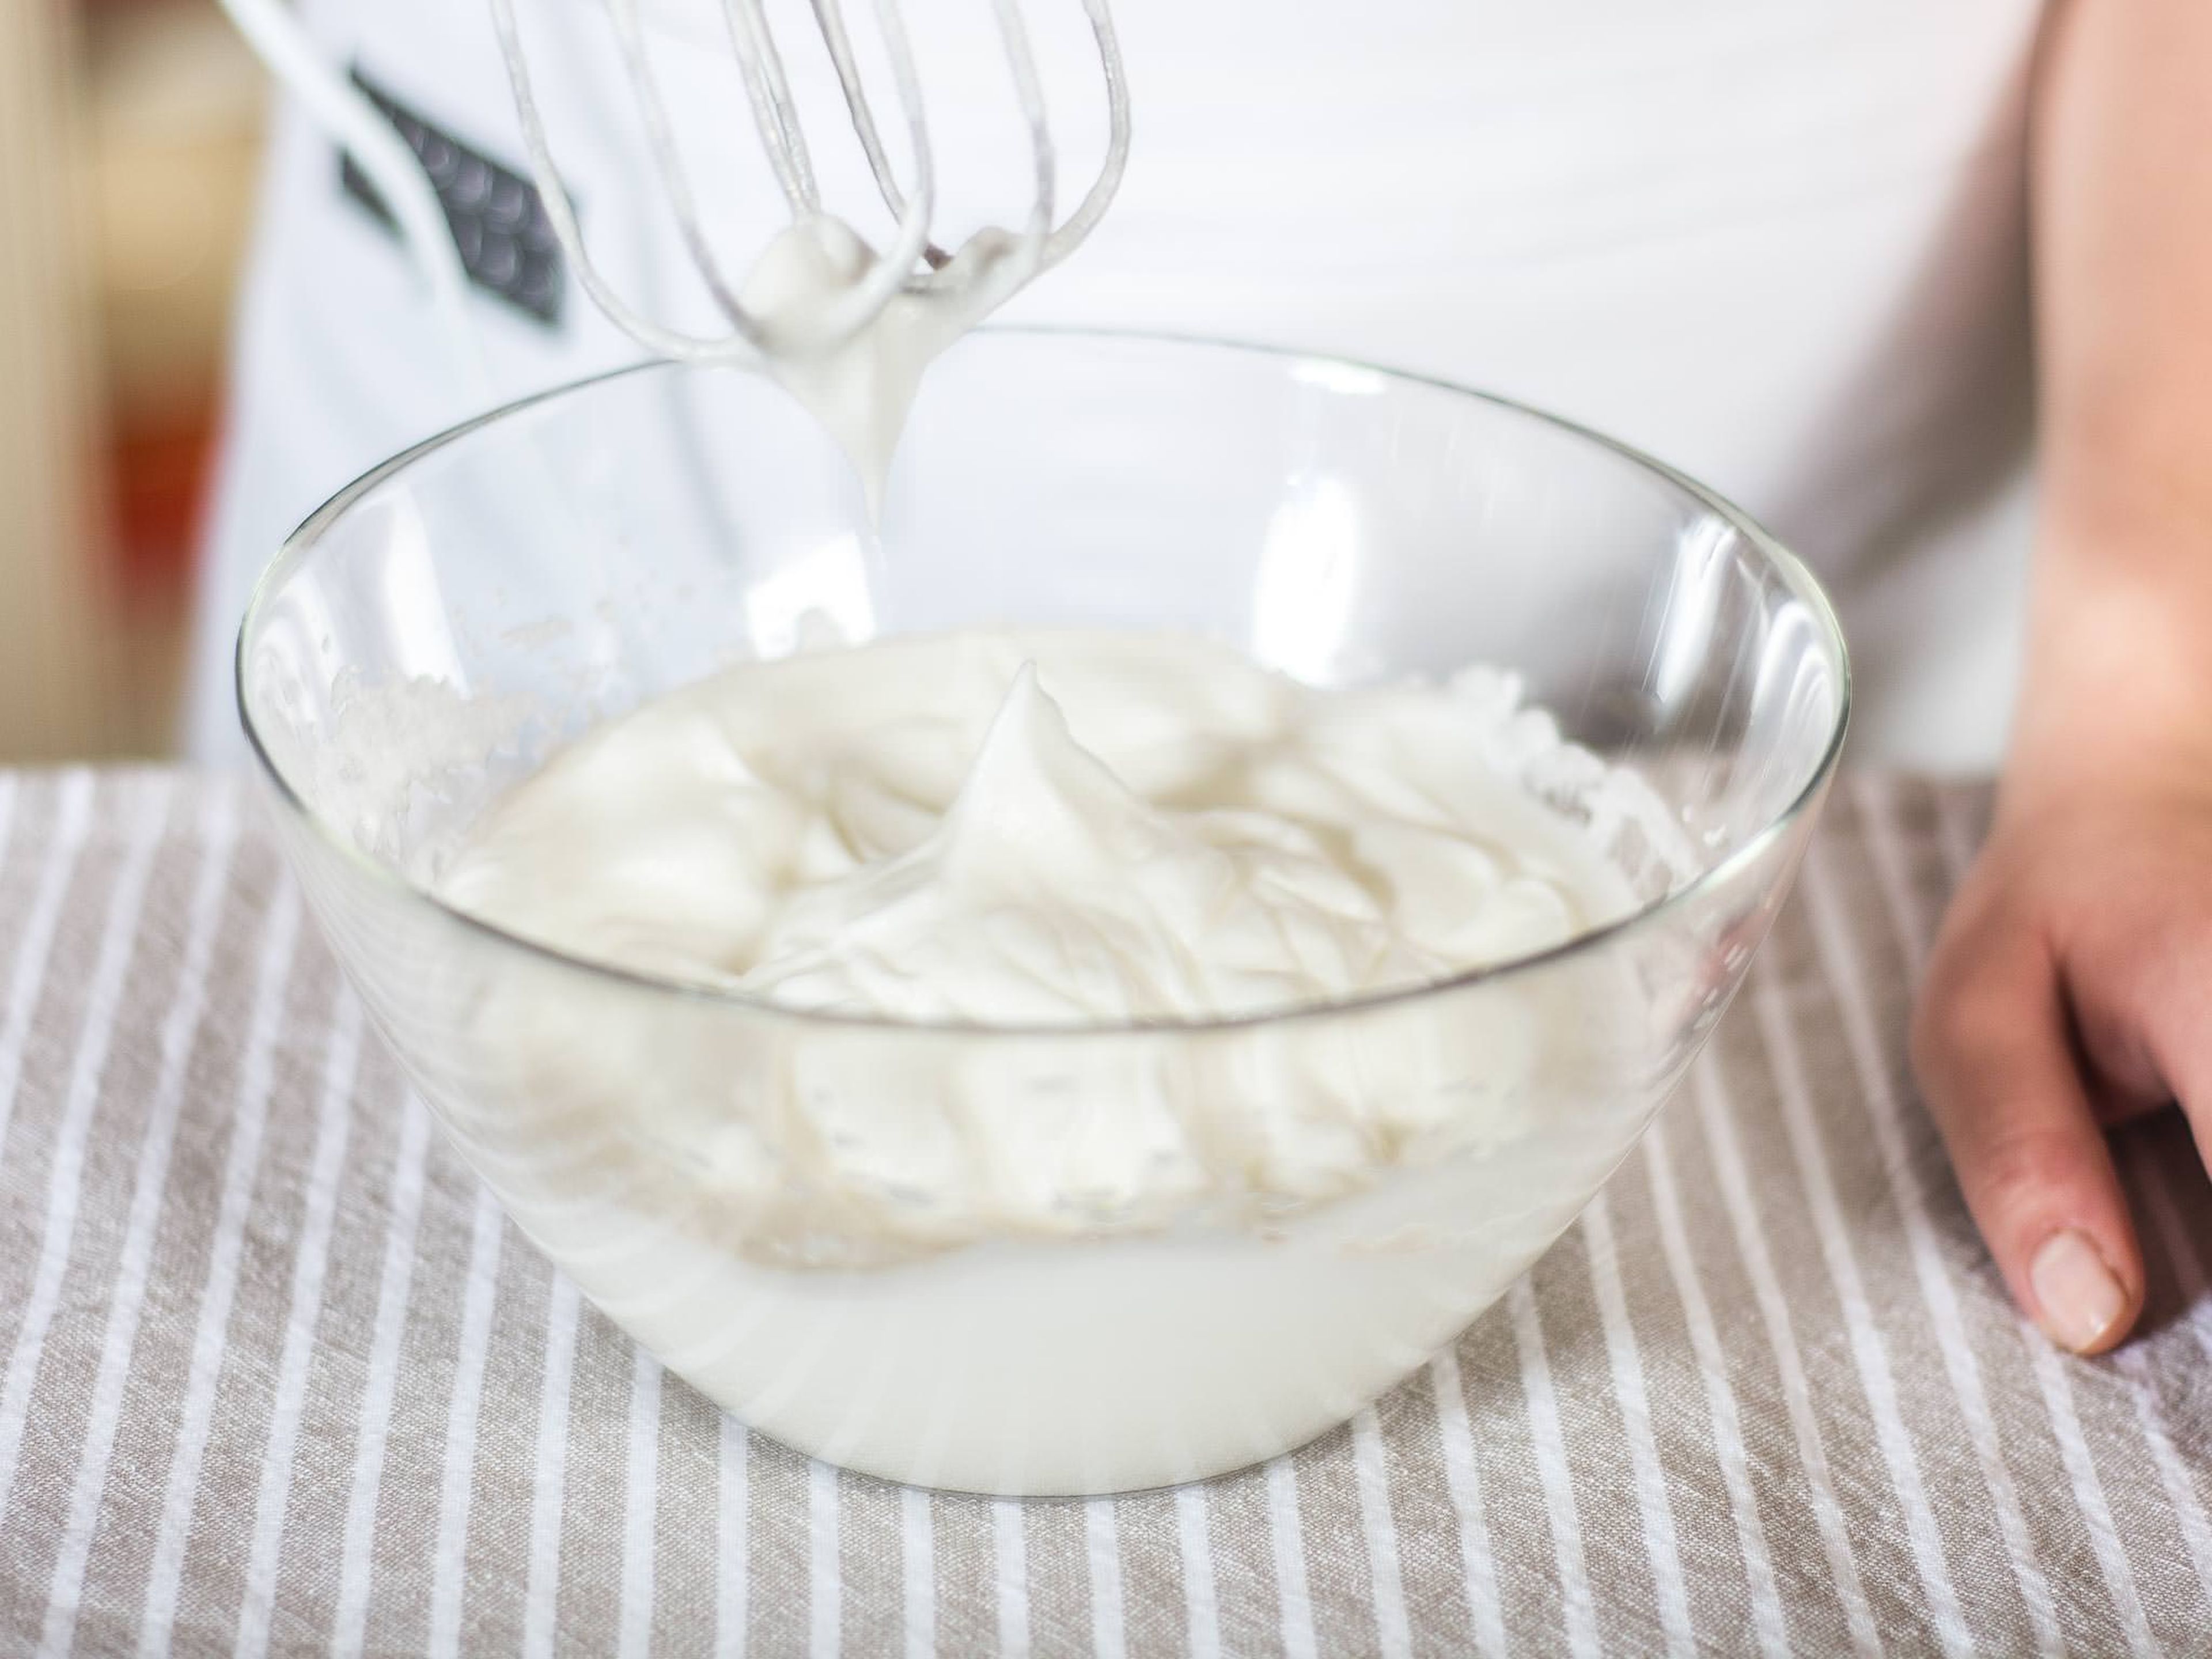 Preheat the oven to 180°C/ 355°F. Beat egg whites until stiff. As soon as it begins to foam, gradually add half of sugar. The bowl and the beater should be free from any kind of grease, to create the desired consistency.